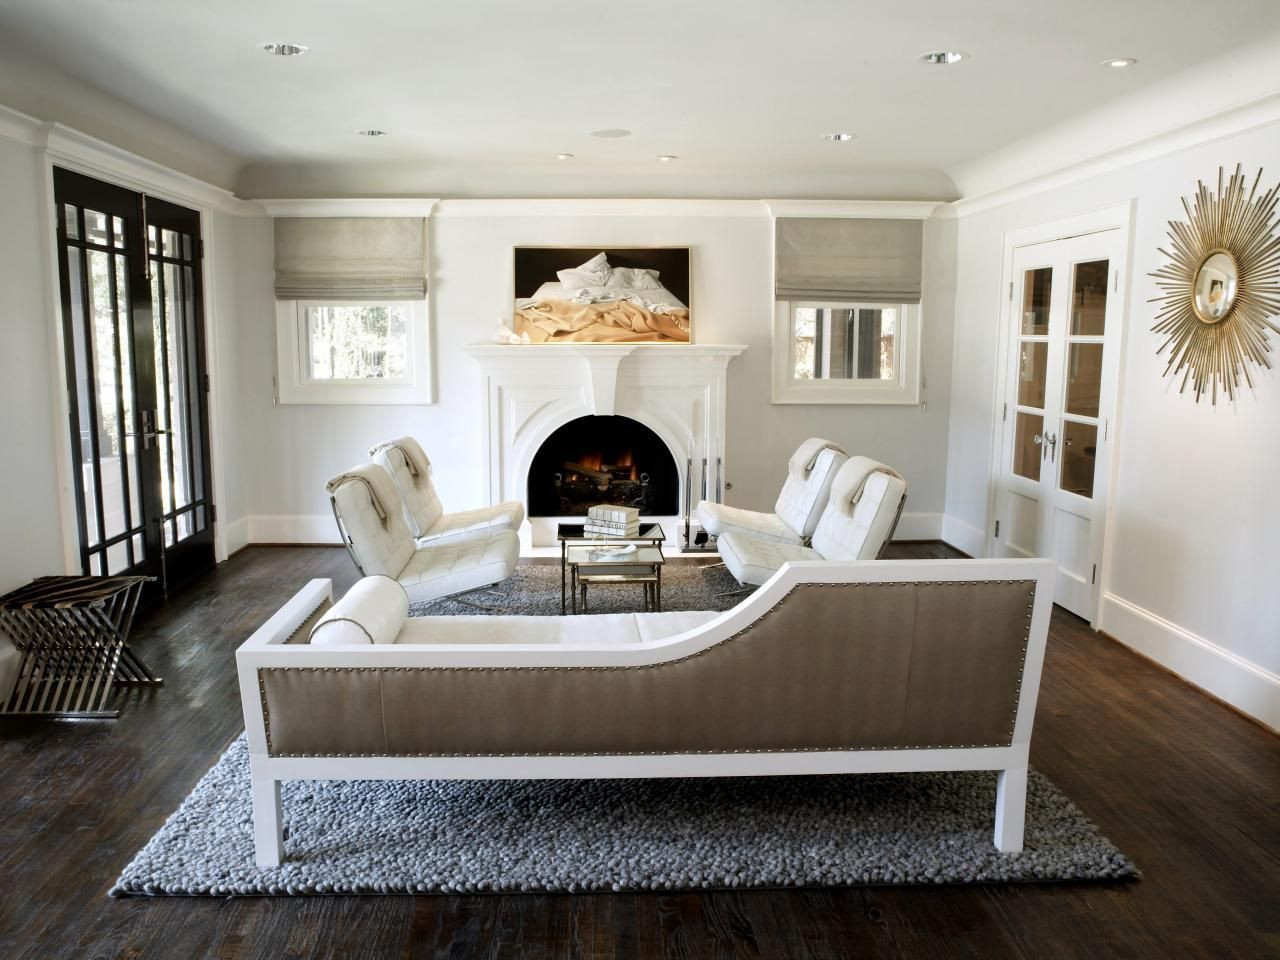 Neutral Color Living Room
 A Guide To Using Neutral Colors In the Home